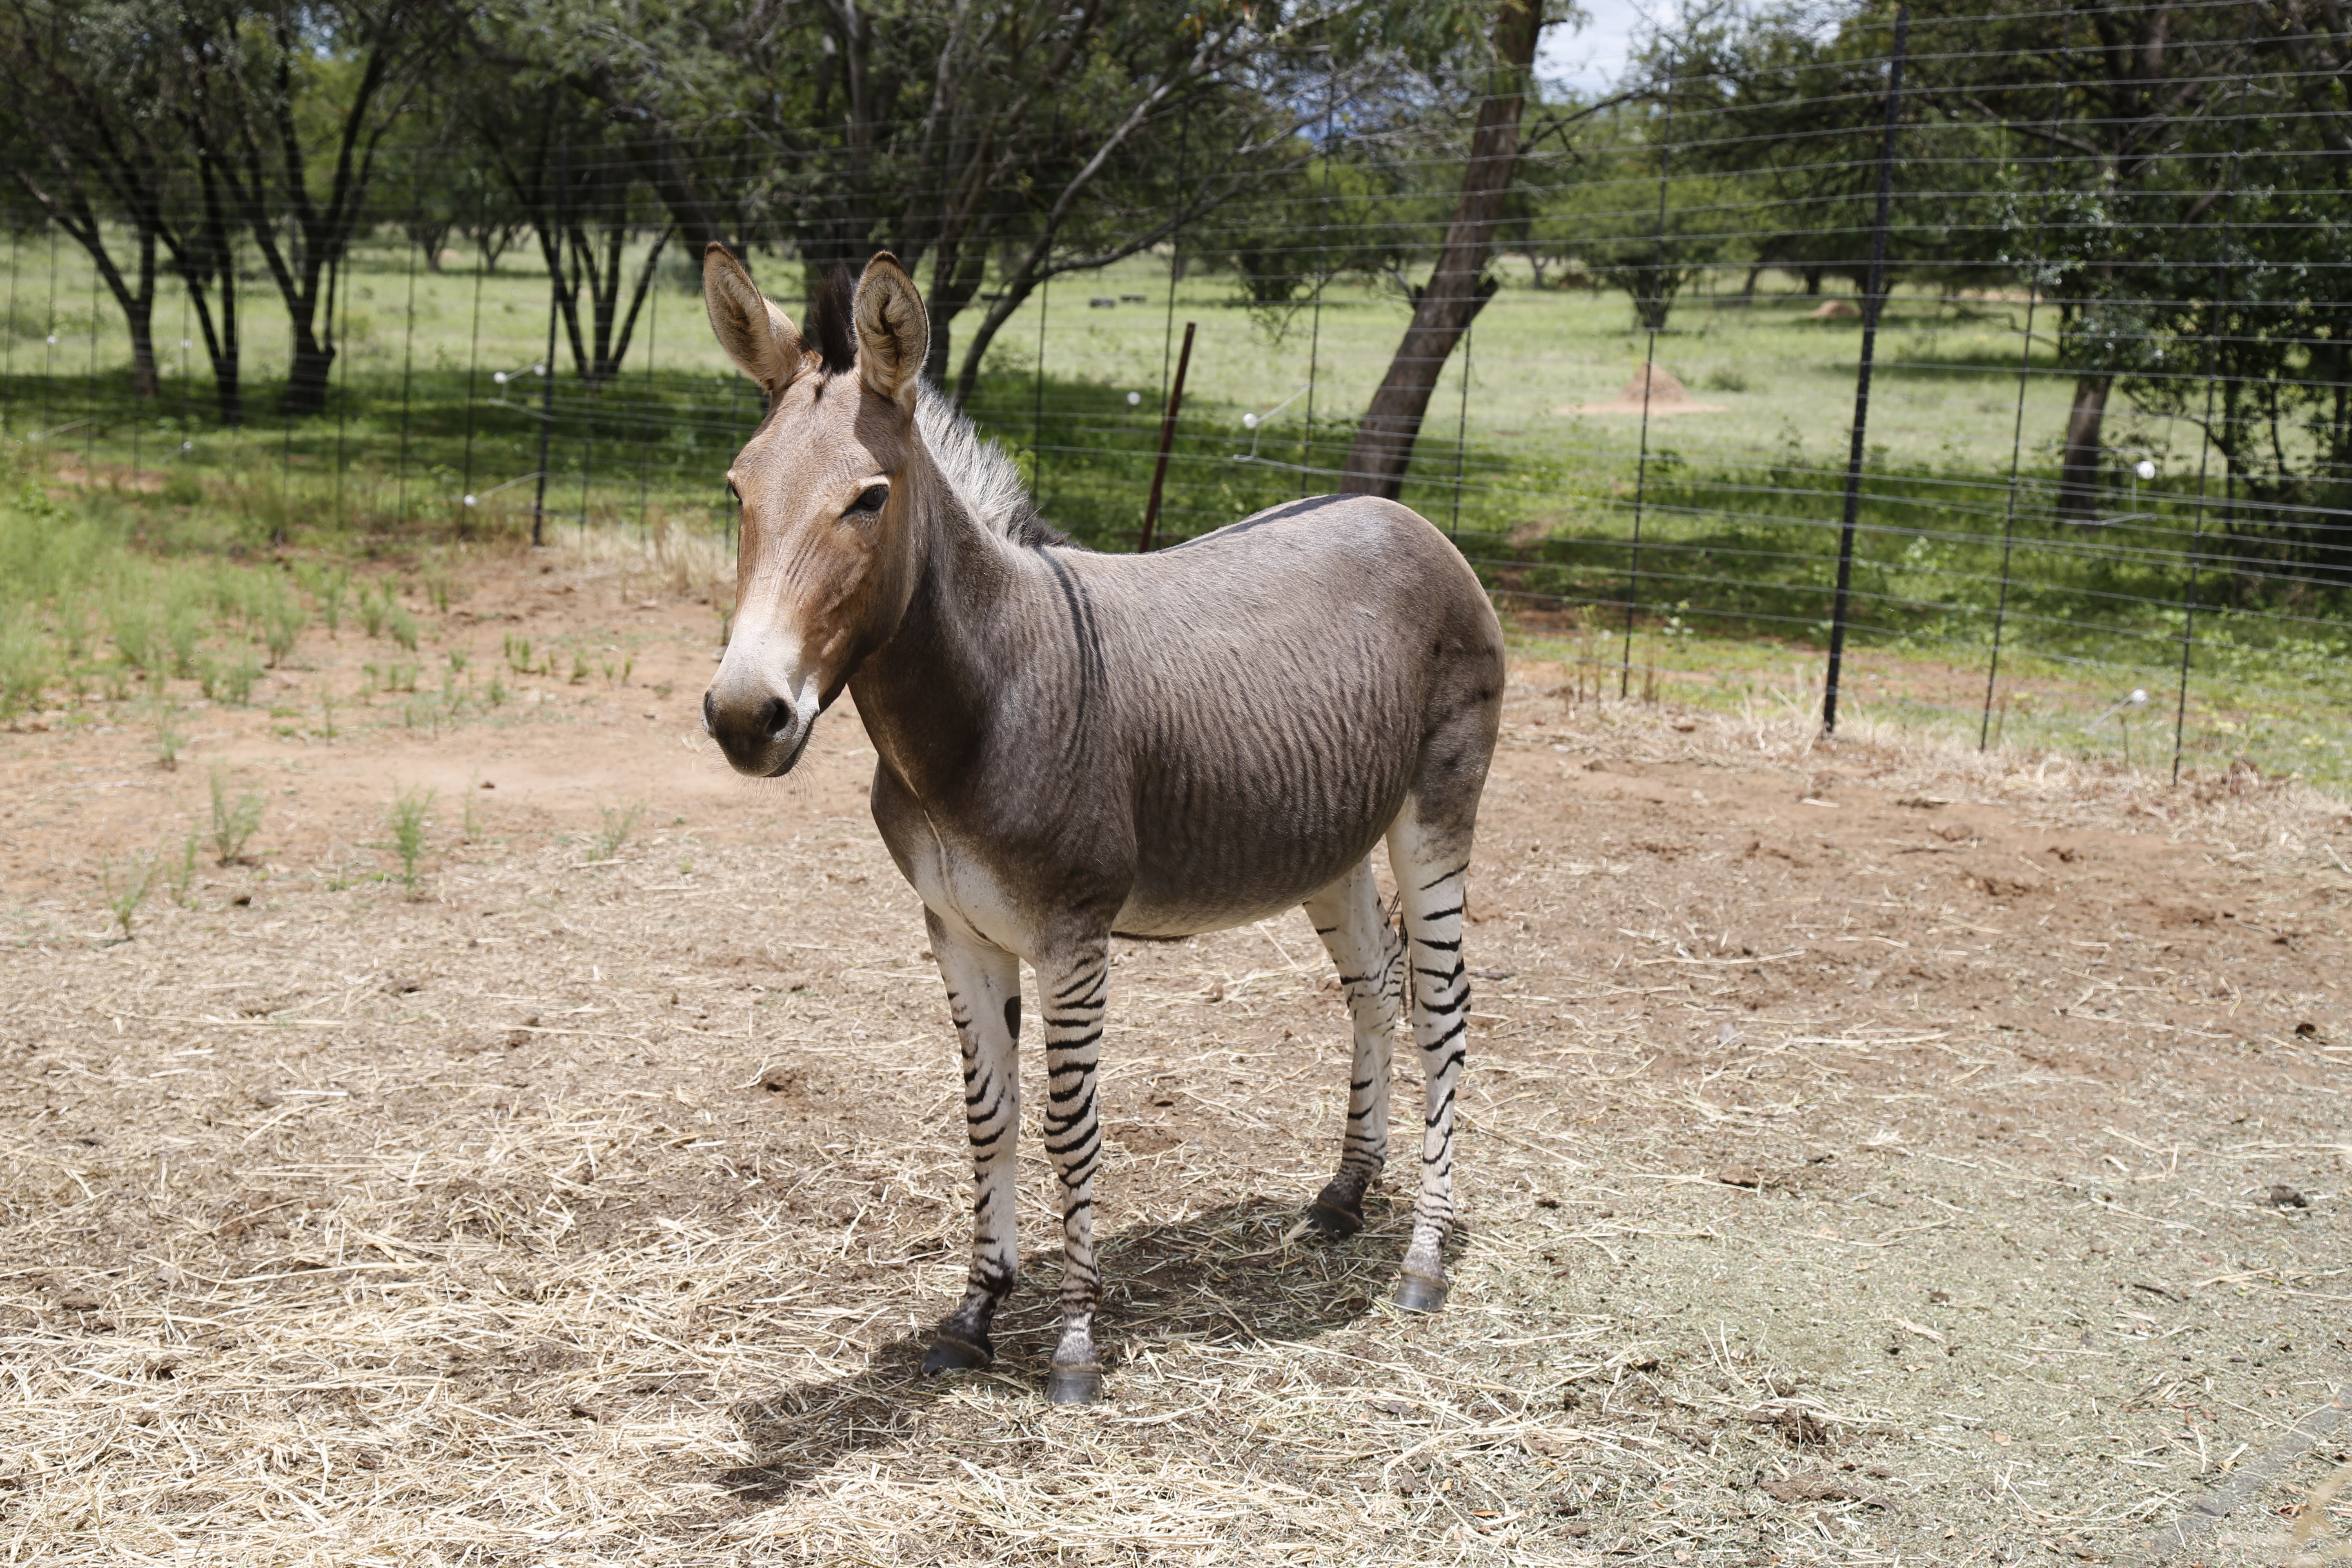 A zebroid,also known as, zedonk, zorse, zebra mule, zonkey, and zebmule by TANGdesign